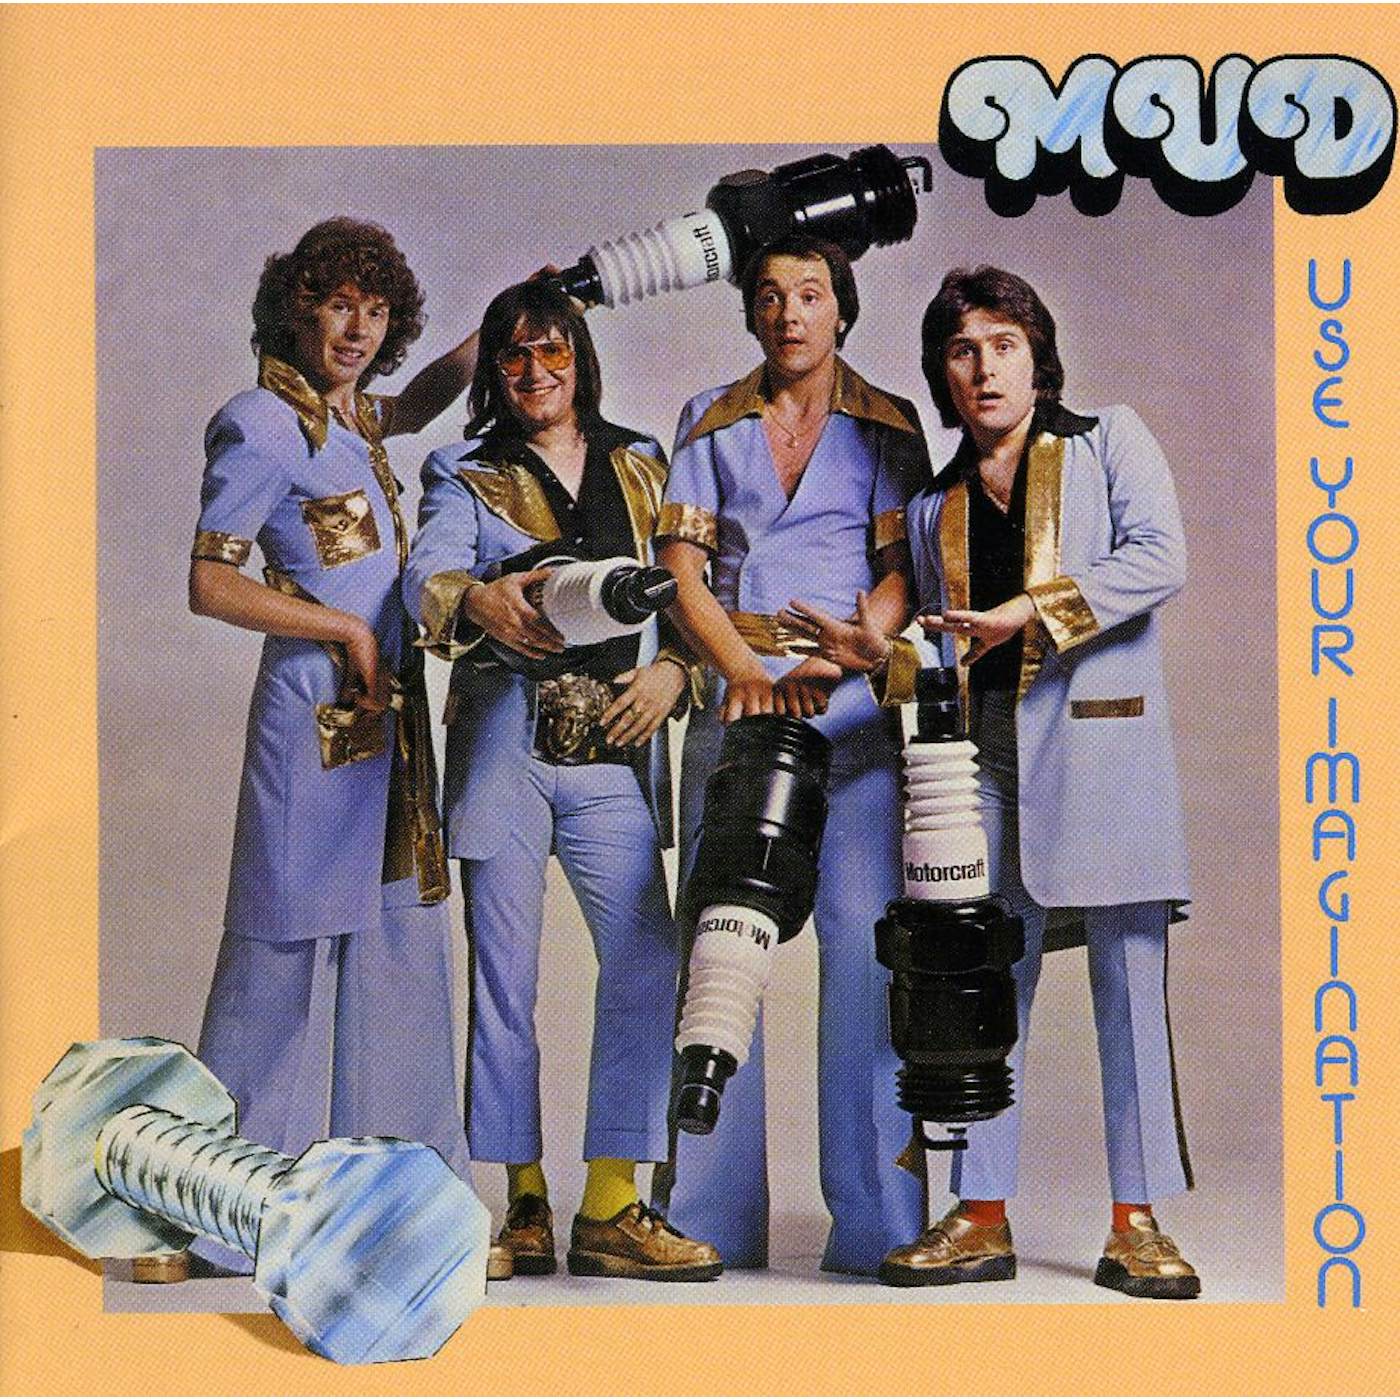 Mud USE YOUR IMAGINATION CD